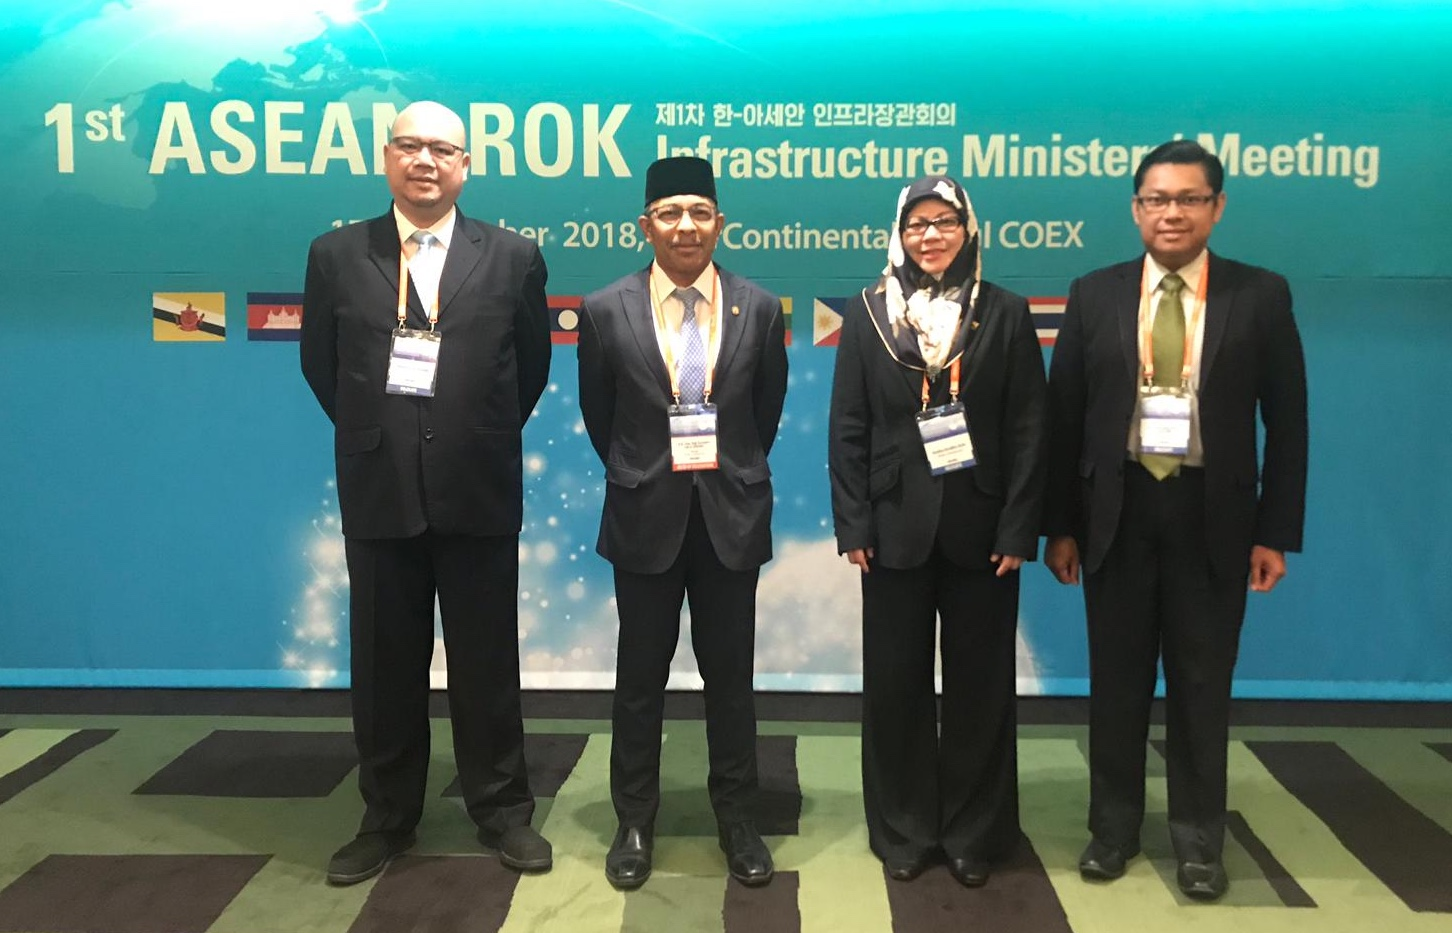 1_1st ASEAN-ROK INFRASTRUCTURE MINISTERS' MEETING.png